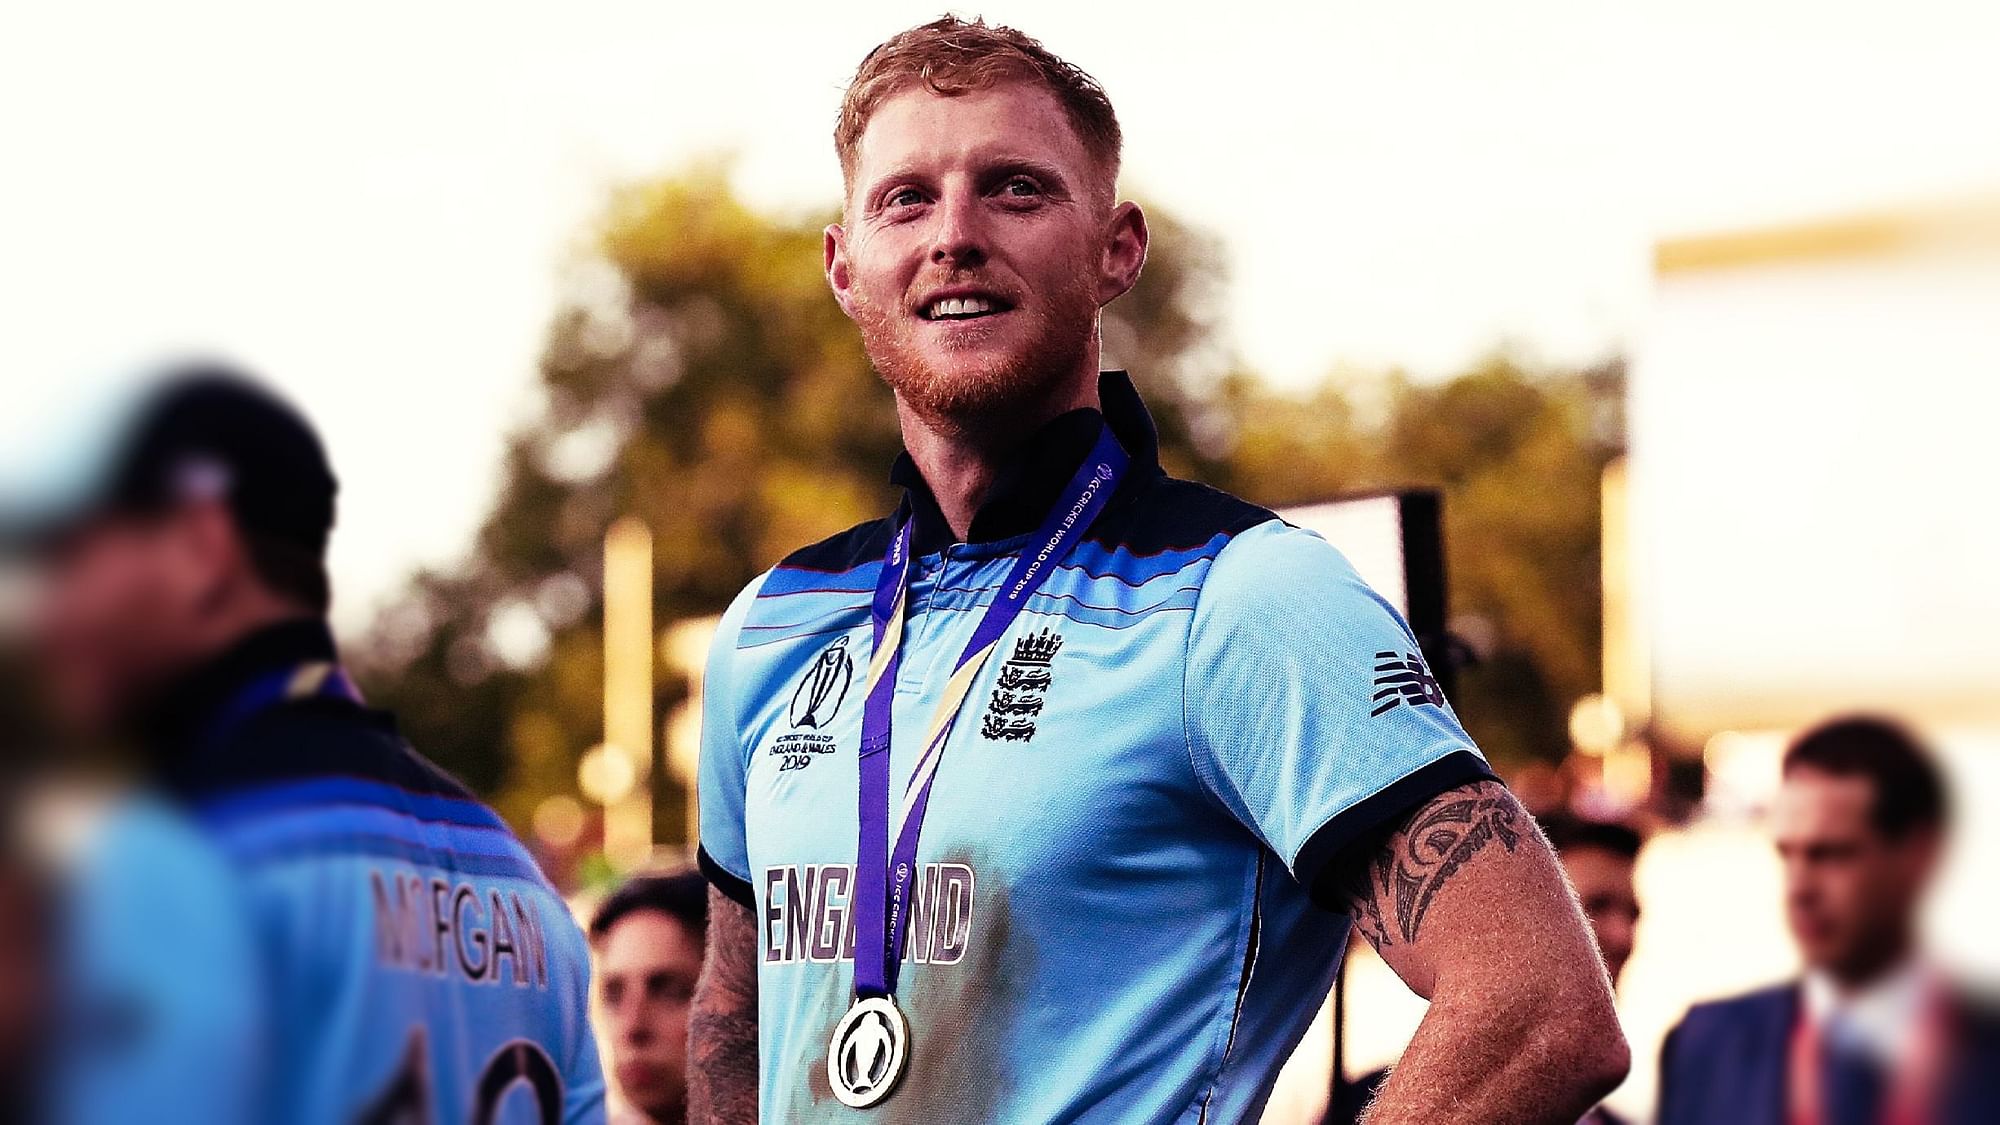 Ben Stokes was unbeaten on 84 after England were bowled out for 241 in their 50 overs.